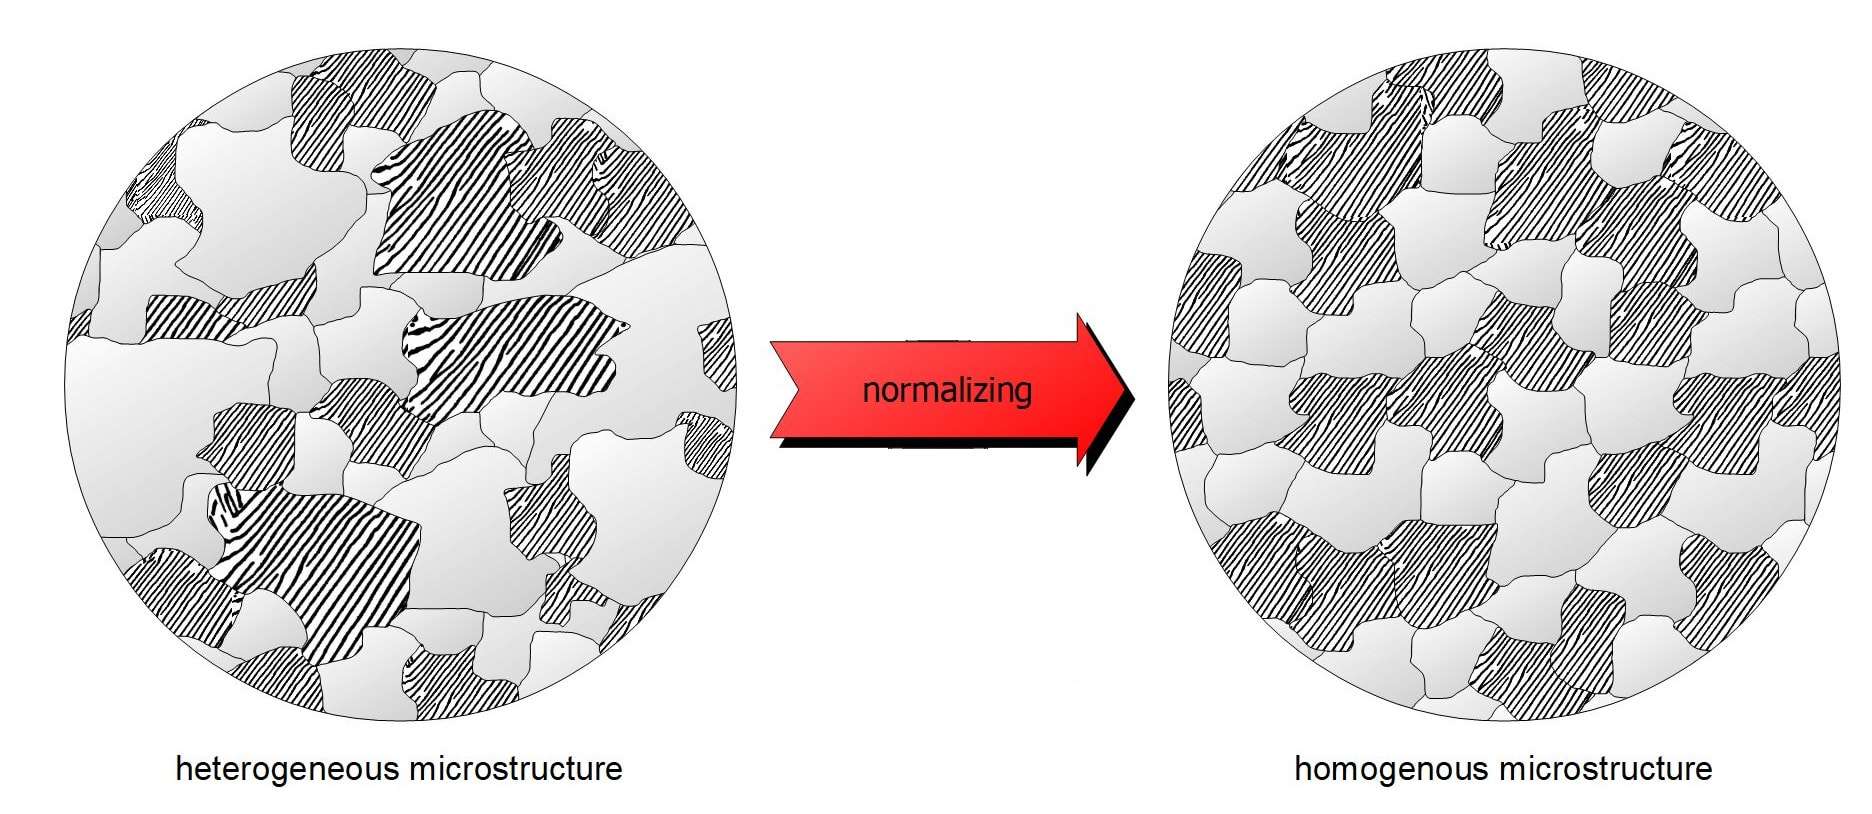 Annealing vs Normalizing-microstructure